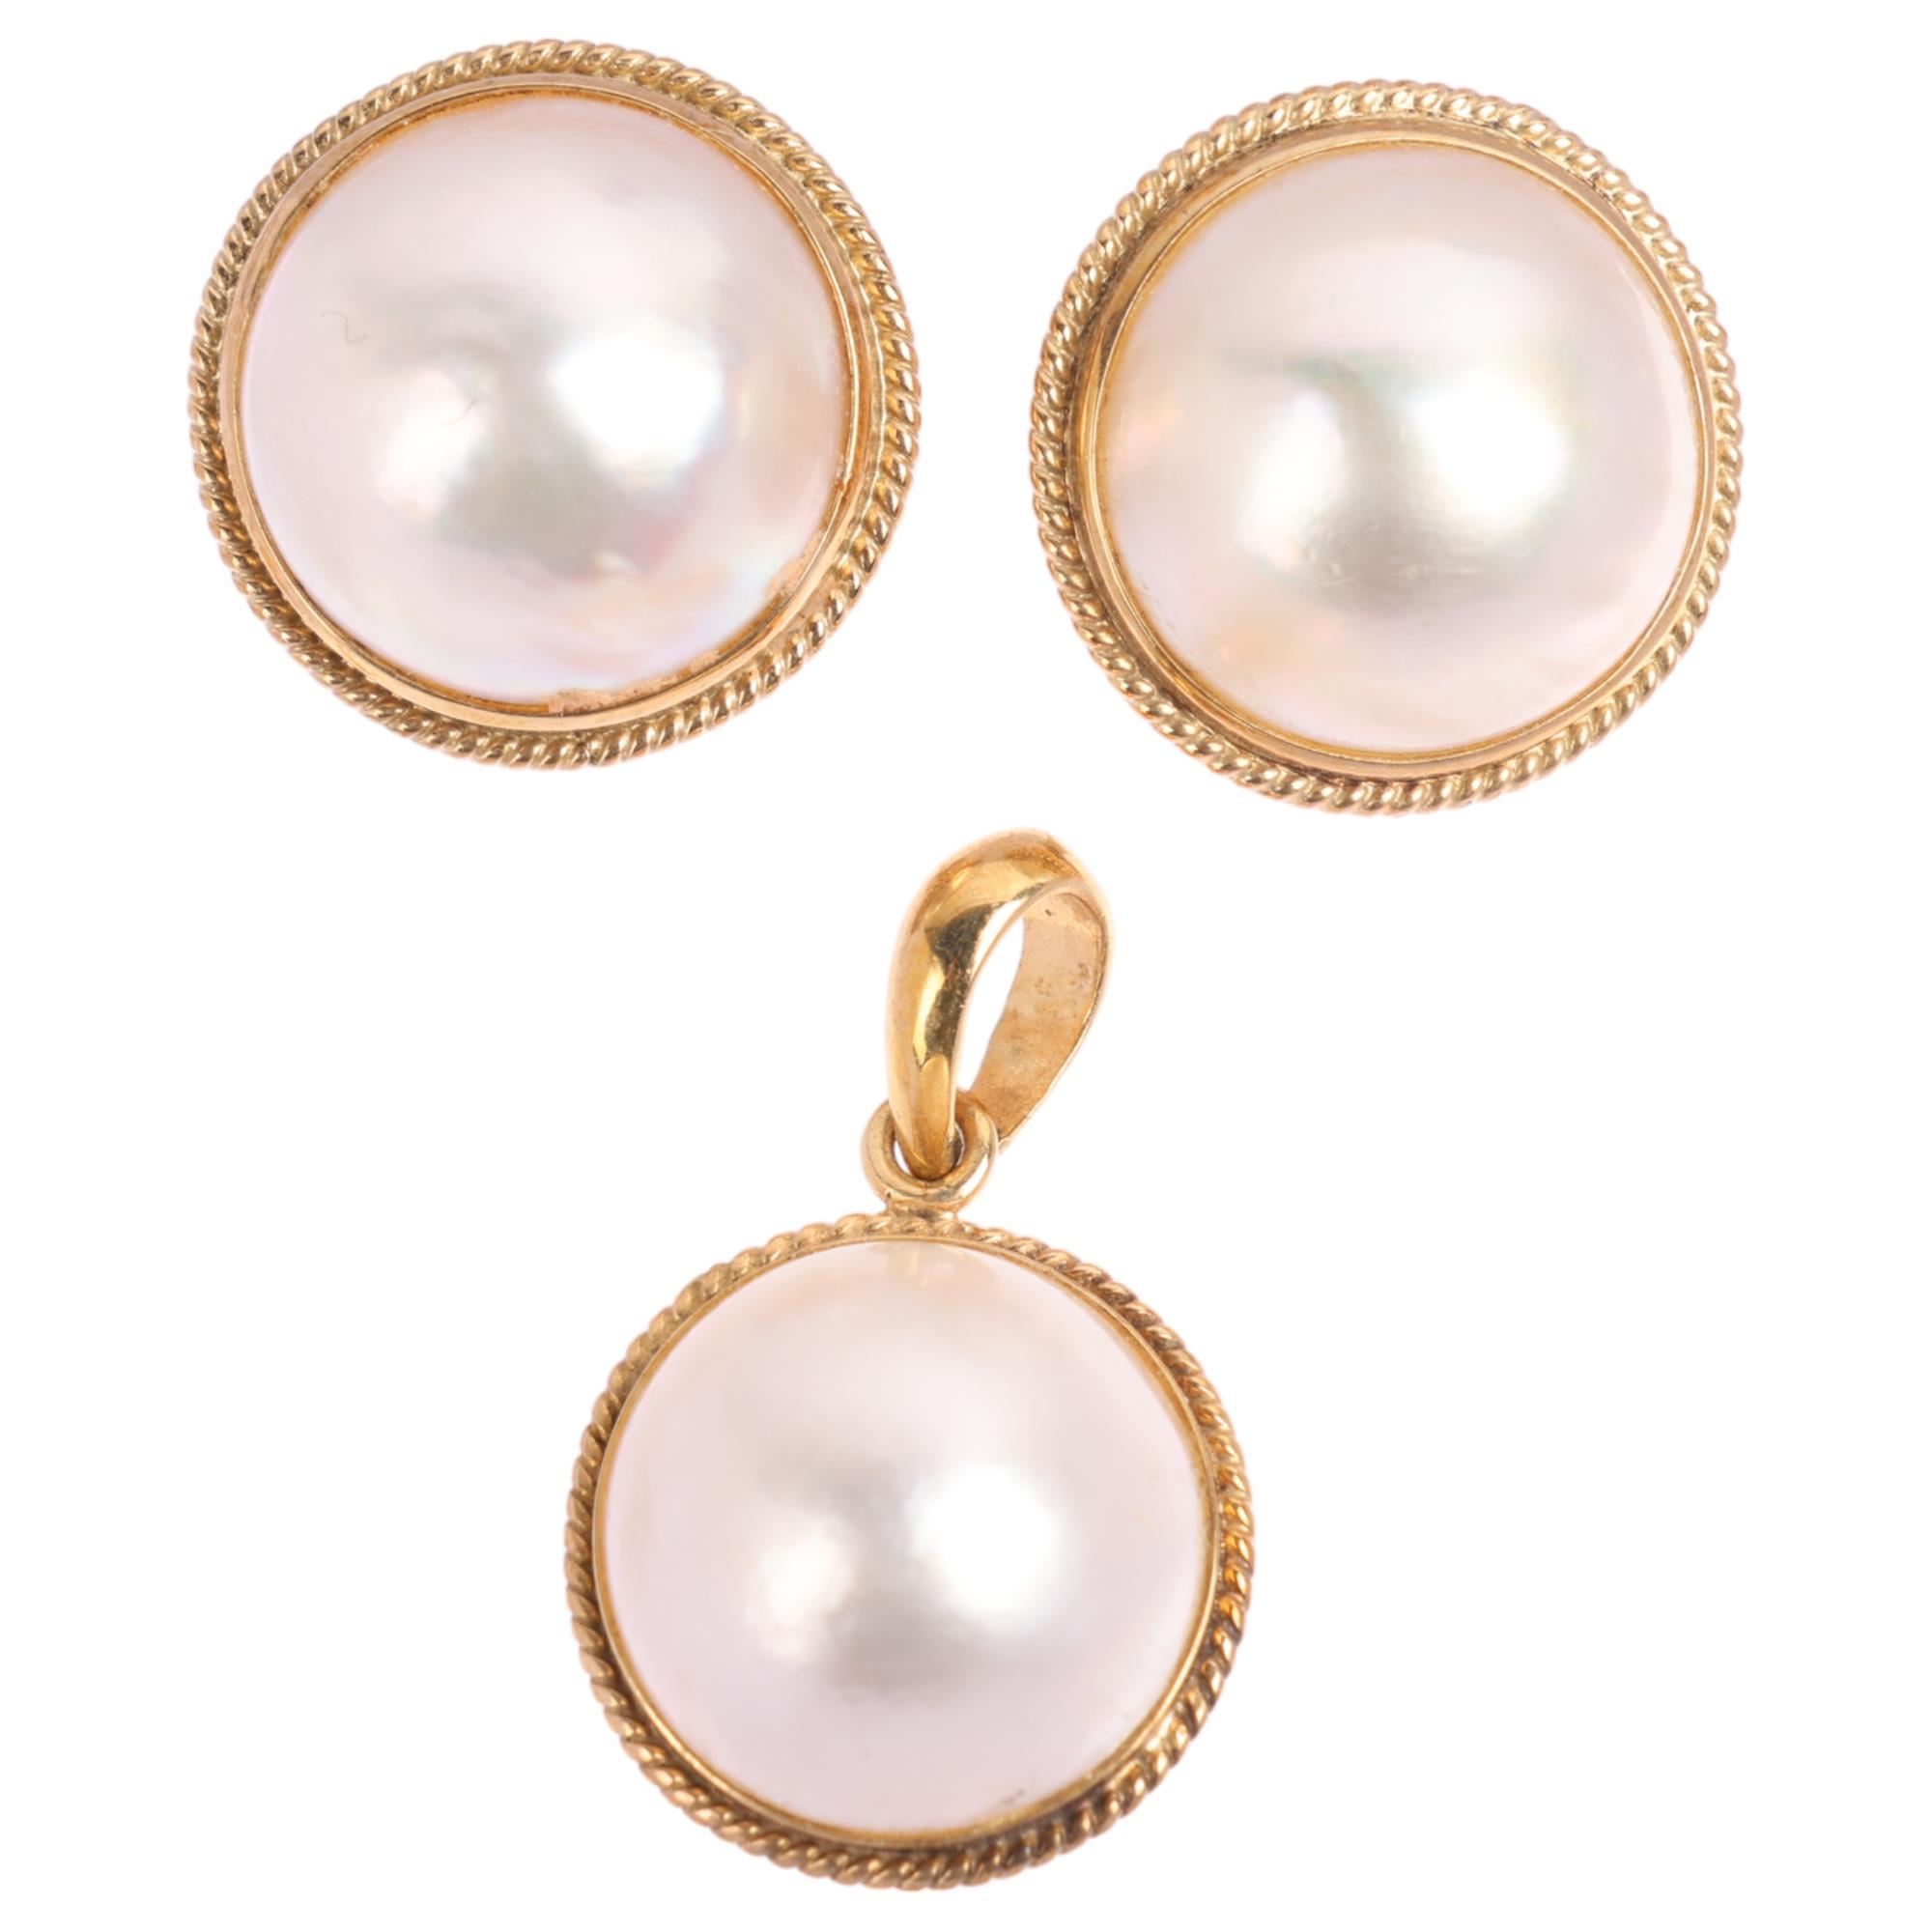 A 9ct gold Mabe pearl pendant and earring set, pendant 20mm, stud earrings 13.3mm, 5g total (2)